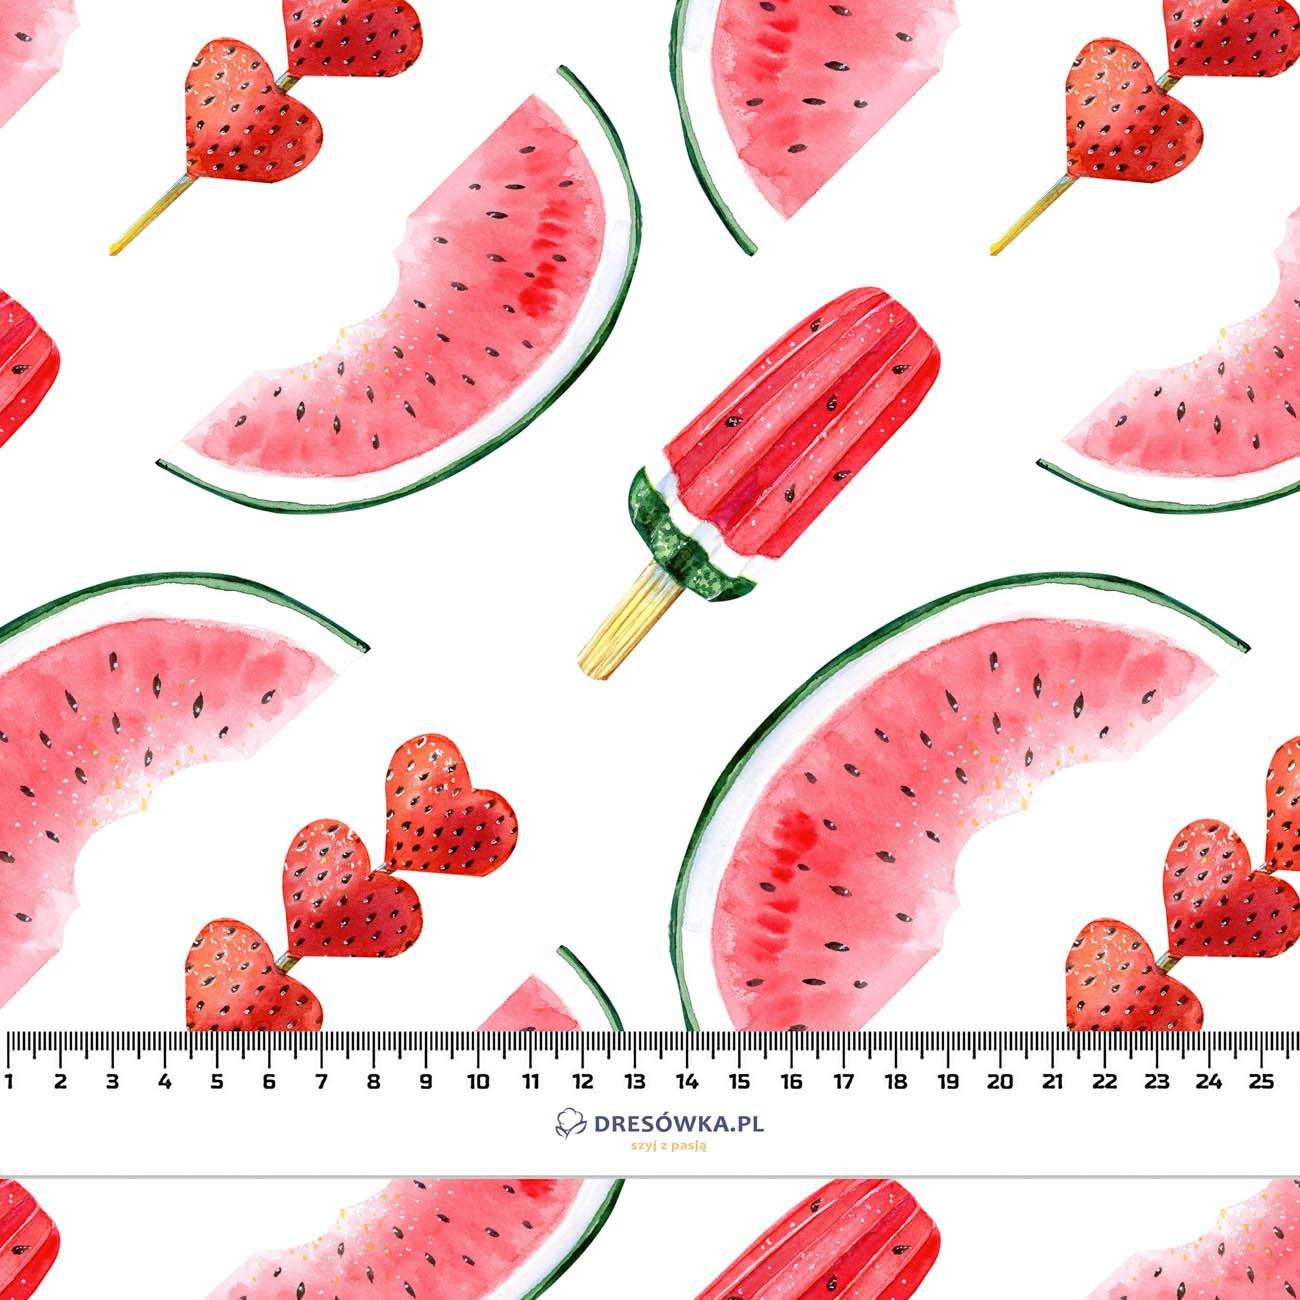 ICE CREAM AND WATERMELONS - Cotton muslin